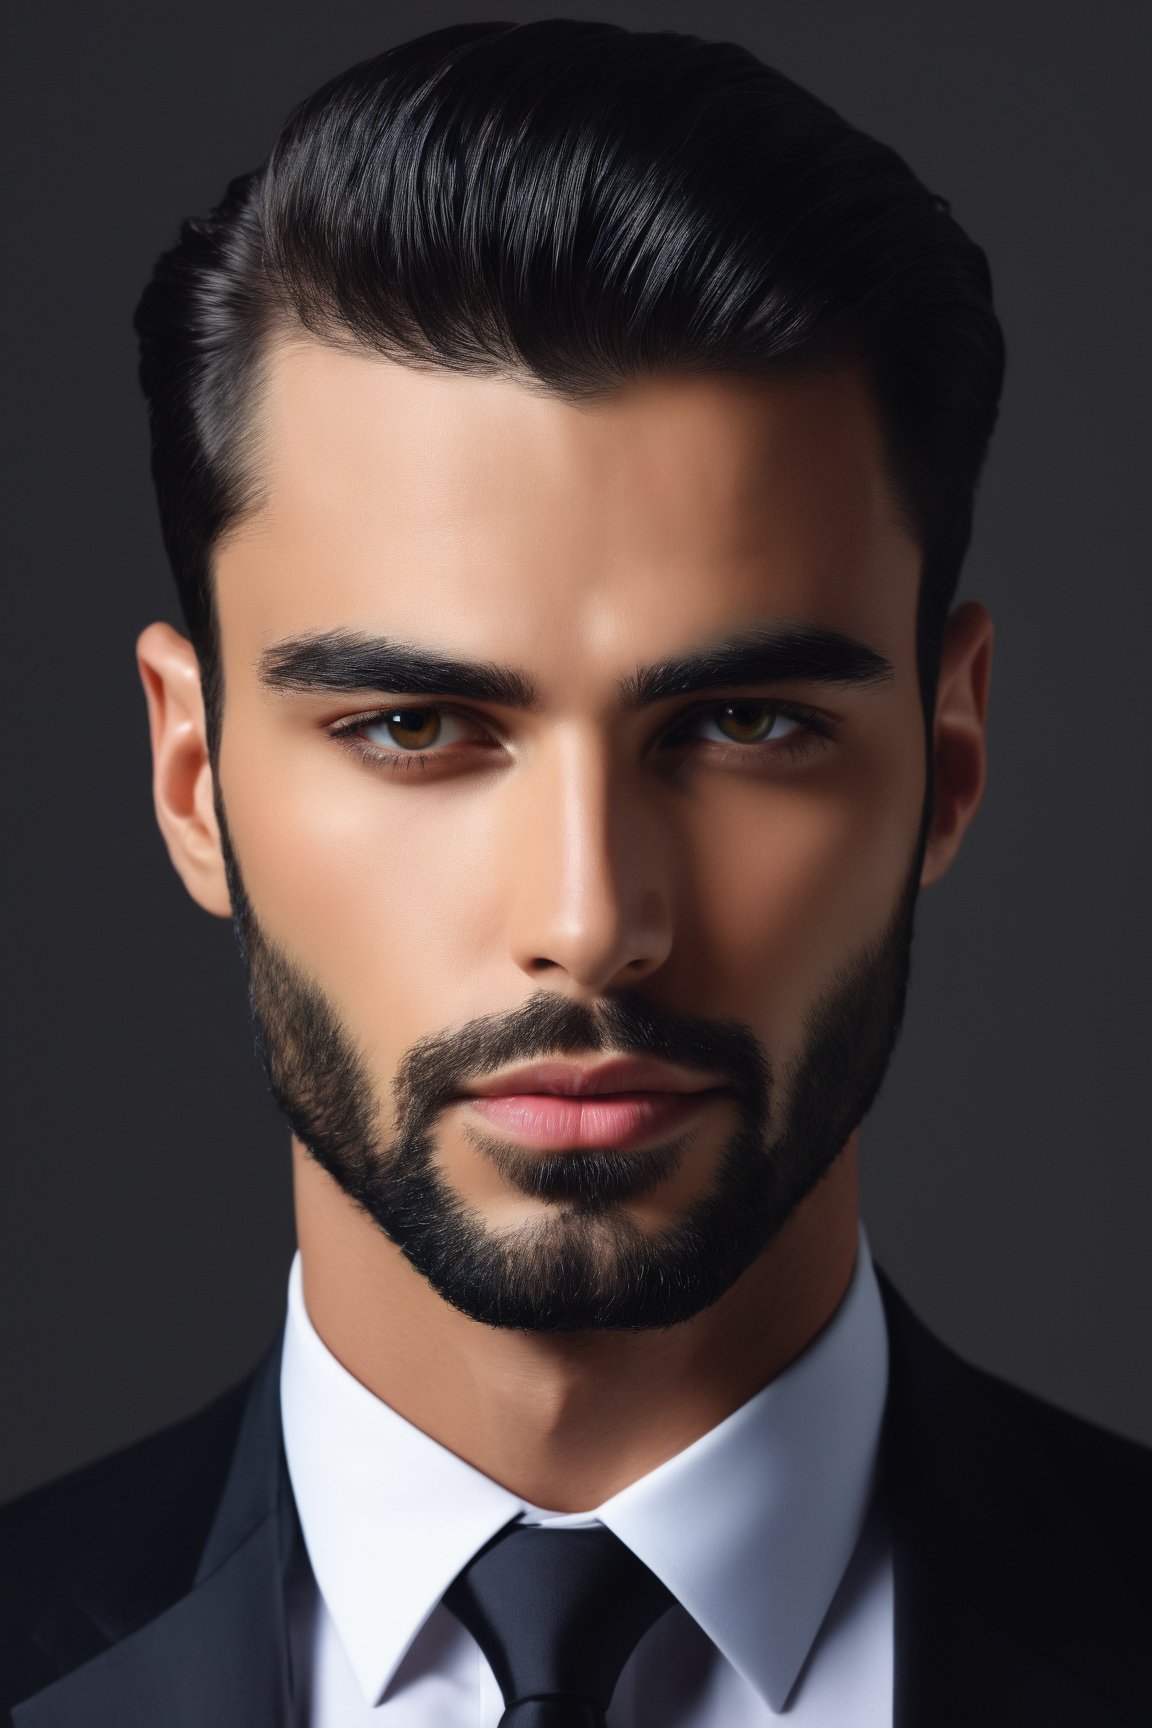 stylish man portrait,professional,dapper gentleman,confident and charismatic,strong jawline and sharp cheekbones,intense stare and piercing eyes,sleek black suit and tie,fashionable hairstyle and well-groomed beard,impeccable sense of style,artistic lighting and dramatic shadows,vibrant and rich colors,high-resolution and ultra-detailed rendering,photorealistic artistry,attention to fine details and textures,modern and sophisticated vibe,subtle hints of vintage charm,striking composition and captivating pose,graceful and confident body language,expressive and captivating facial expression,artistic interpretation with a touch of surrealism